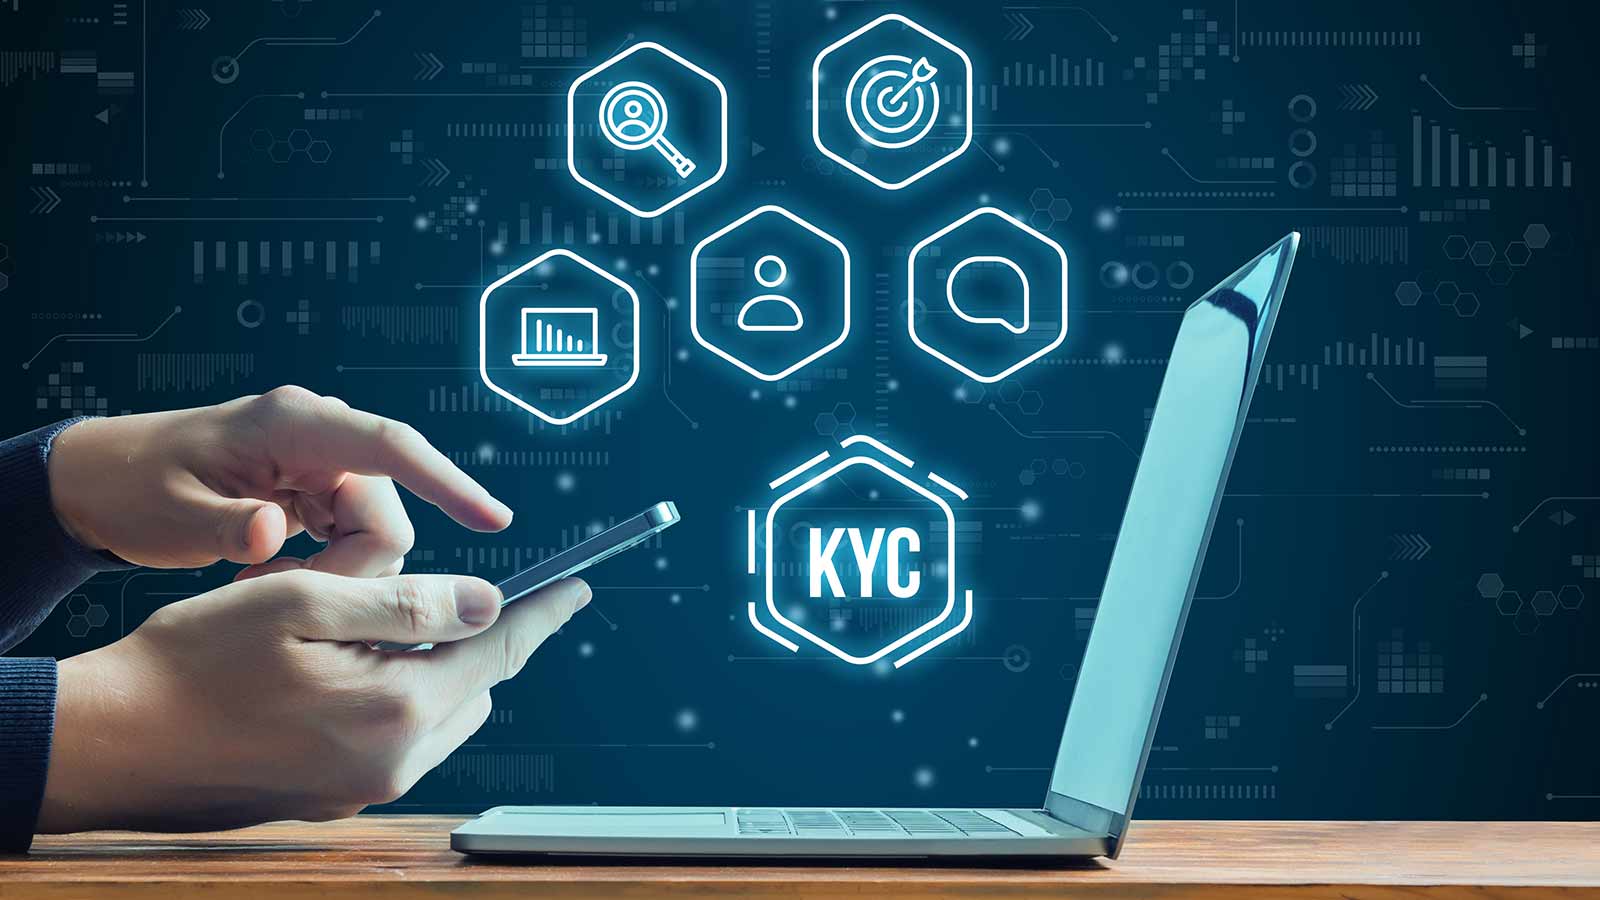 KYC is not complete